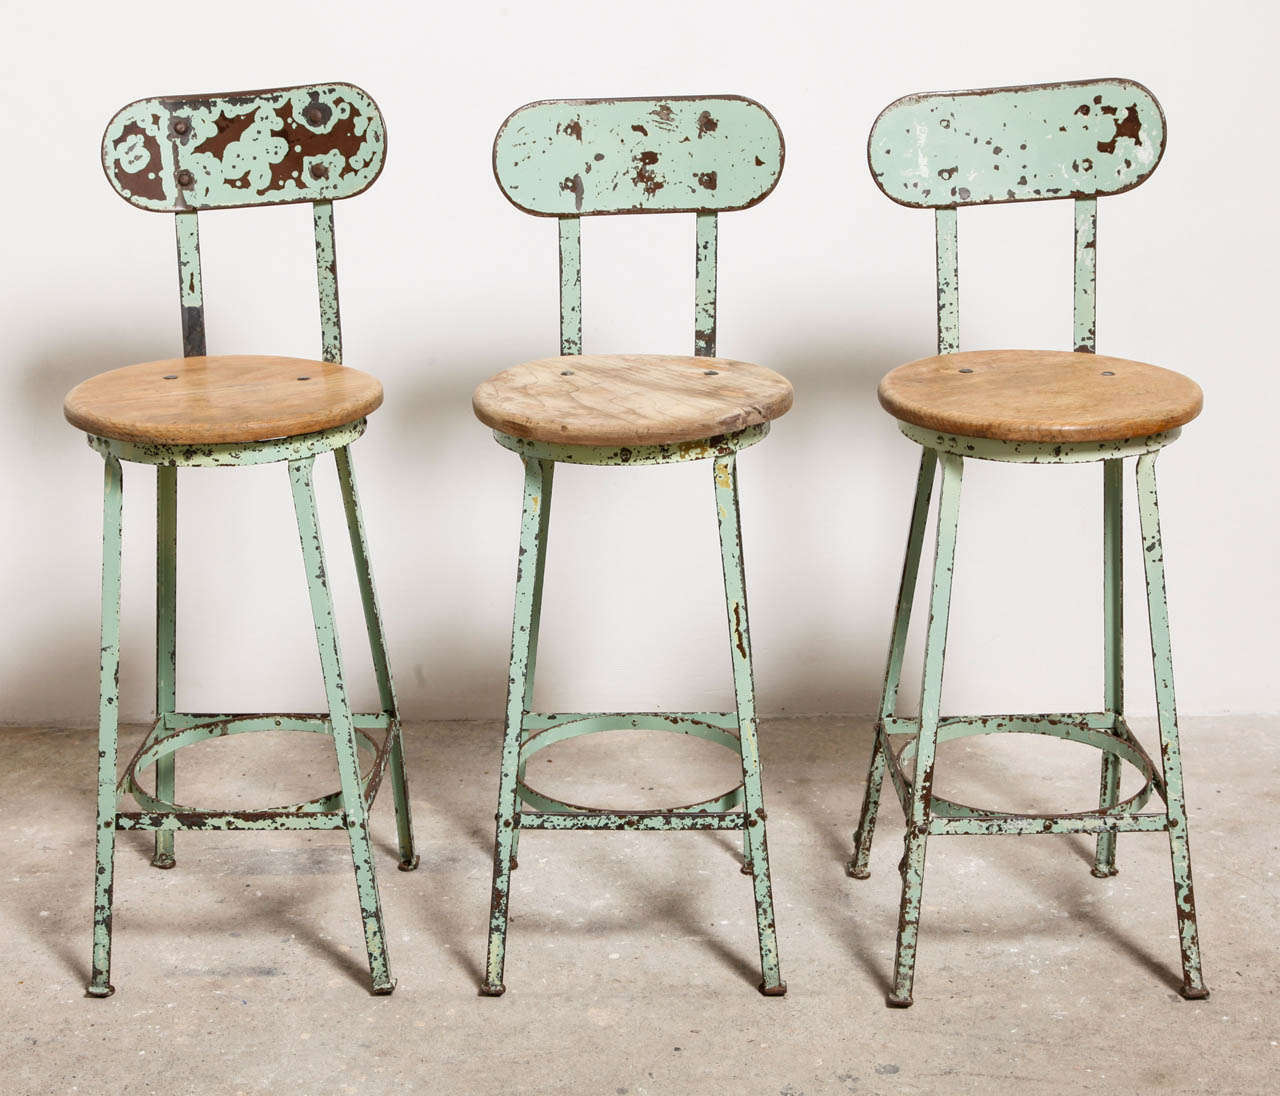 Industrial bar stools, strong and sturdy circa 1930s heavy gauge cold-rolled steel four-legged angled steel factory stool with wooden seat.